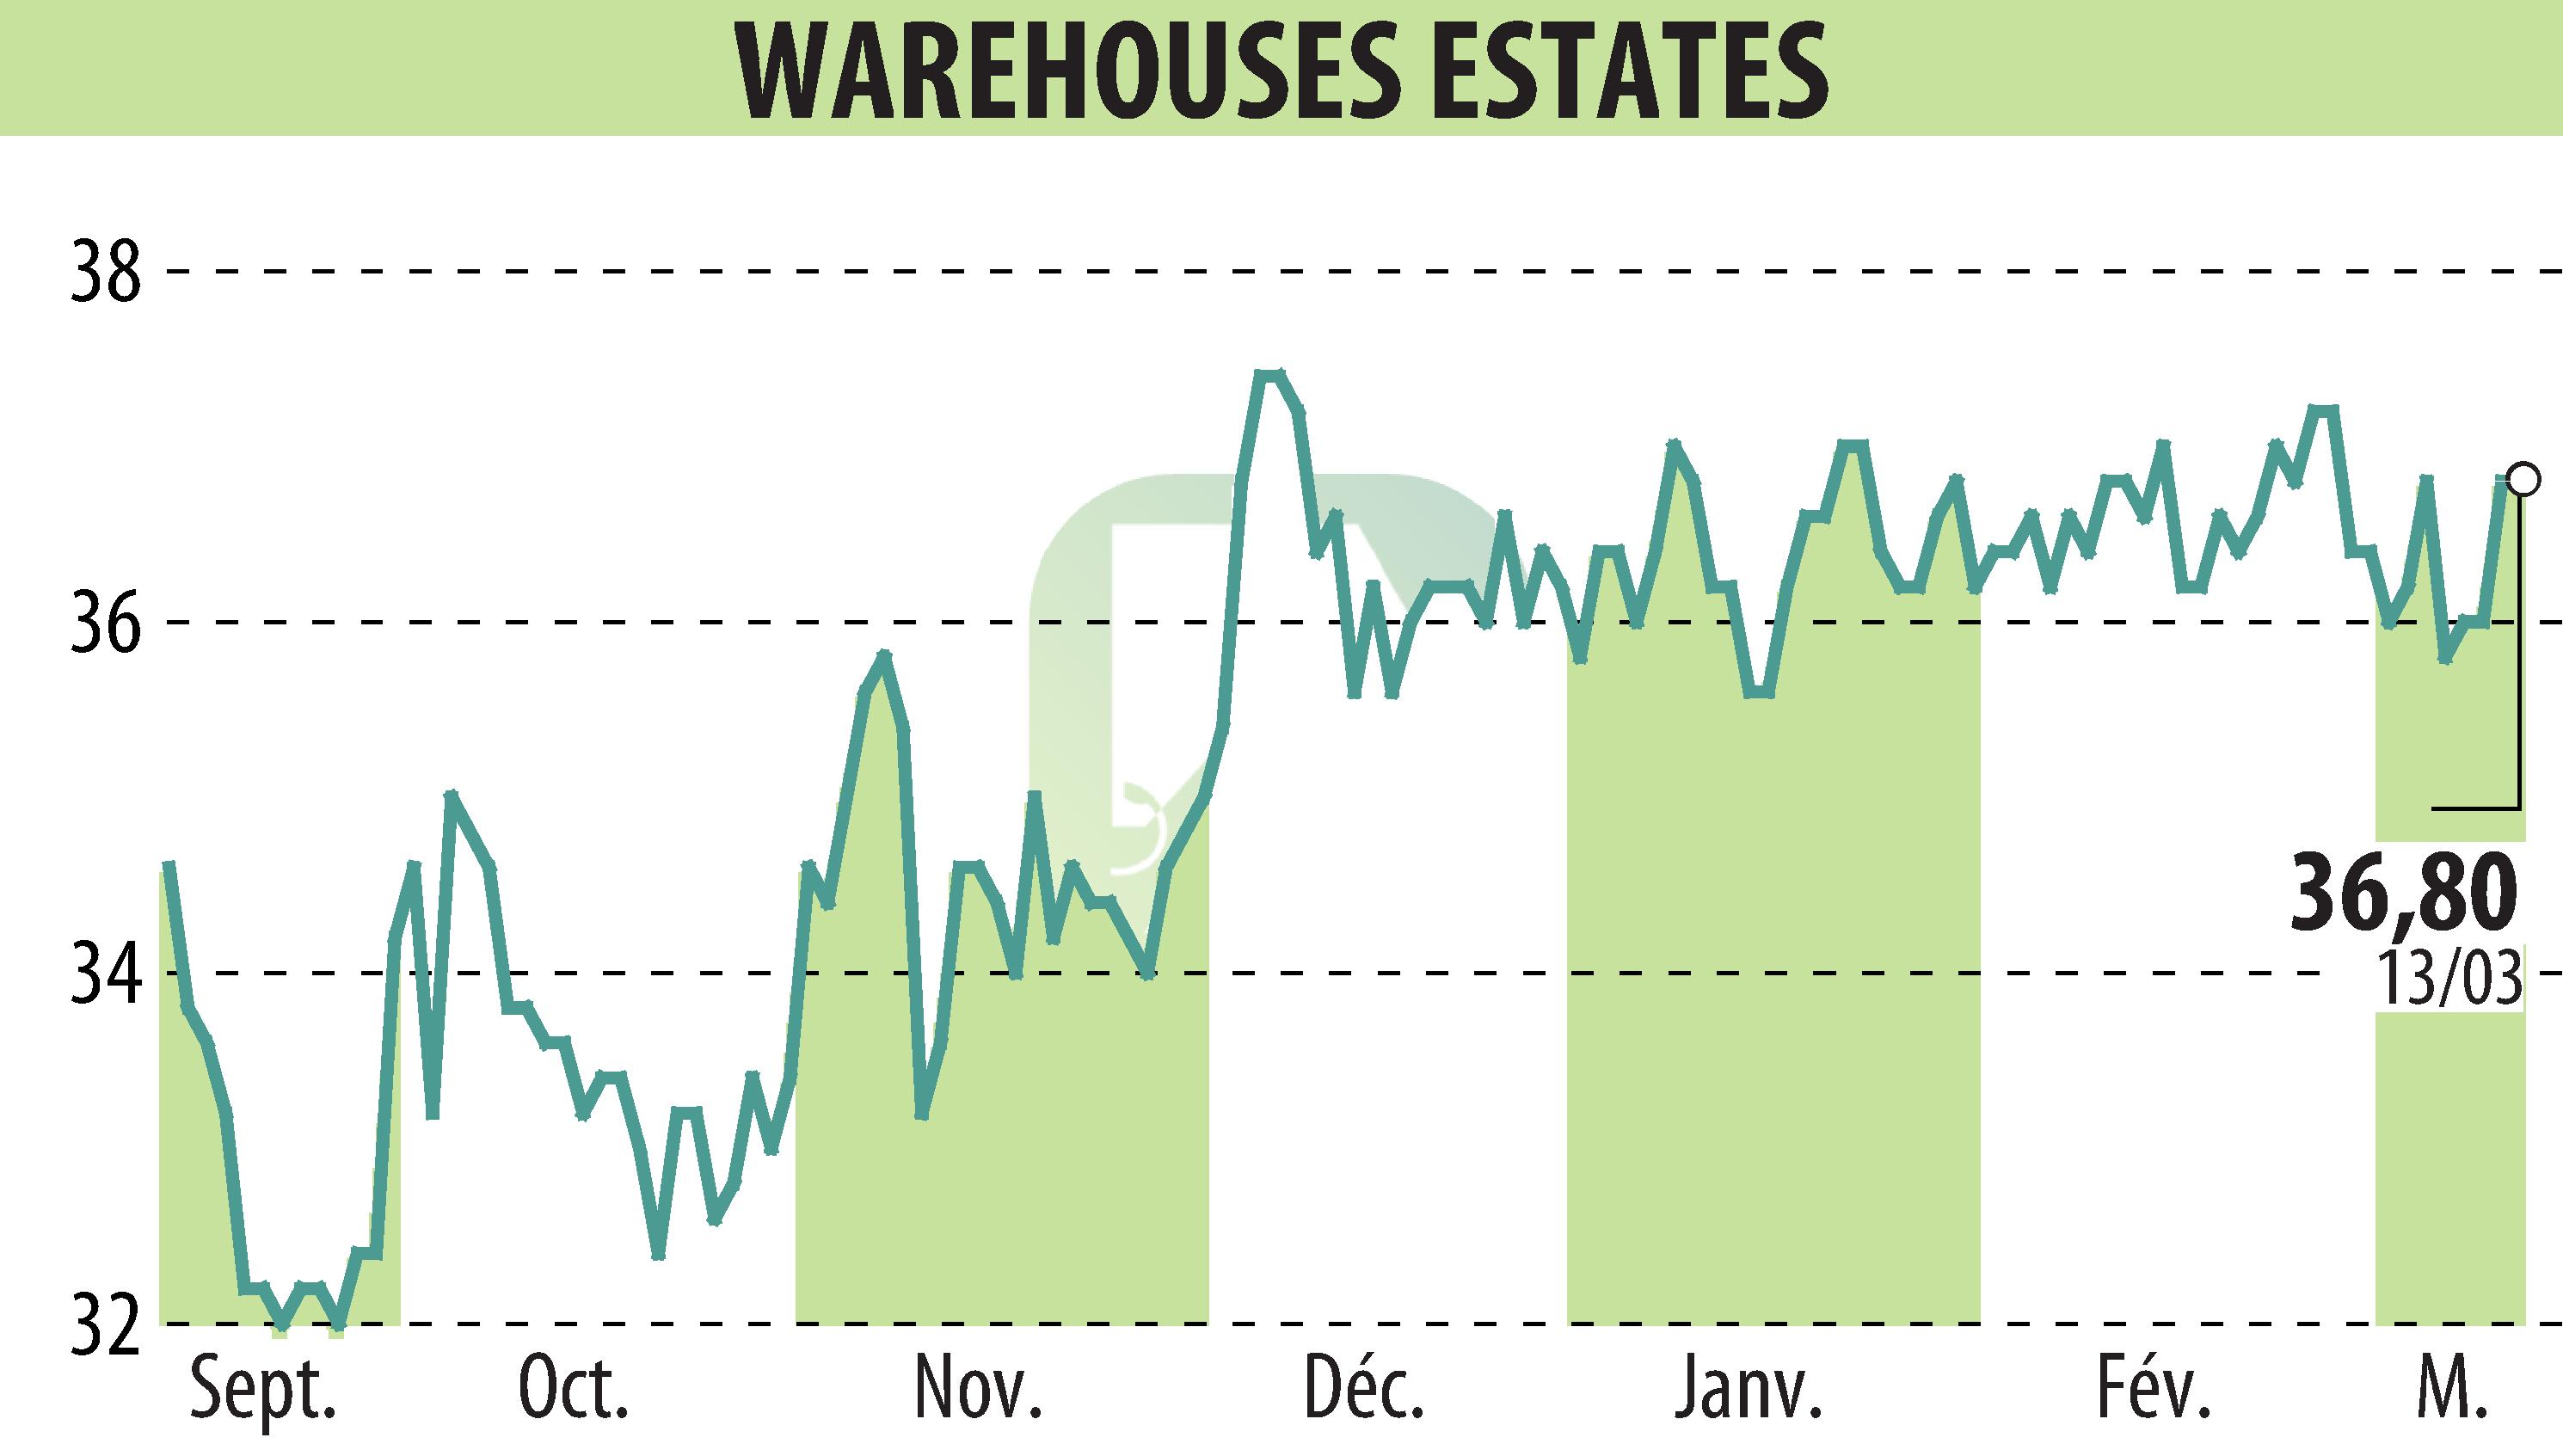 Stock price chart of WAREHOUSE ESTATES BELGIUM S.A. (EBR:WEB) showing fluctuations.